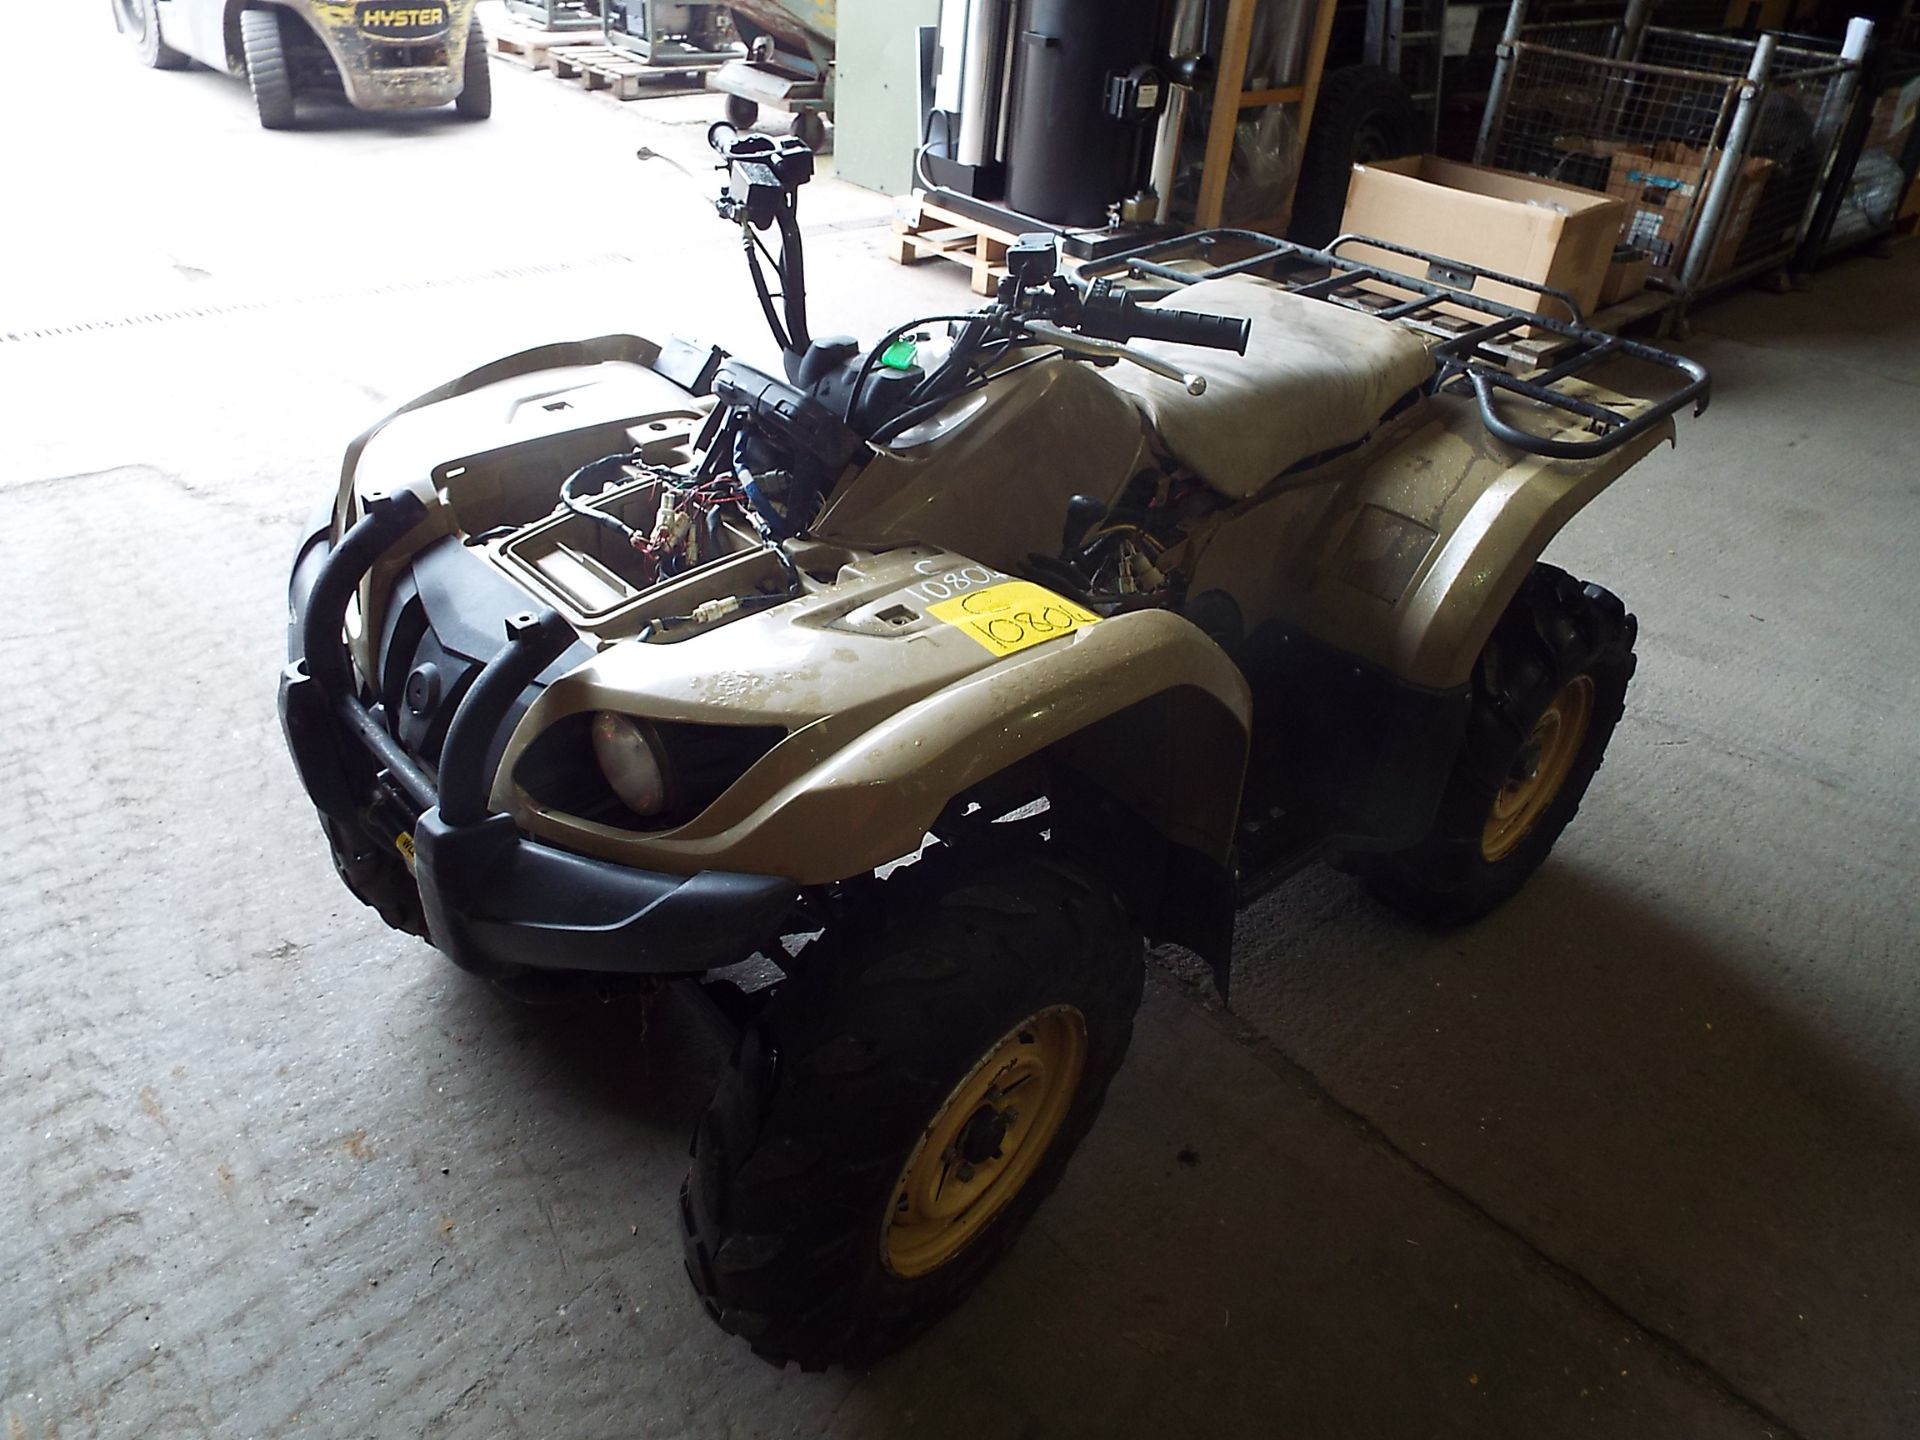 Military Specification Yamaha Grizzly 450 4 x 4 ATV Quad Bike - Image 15 of 19